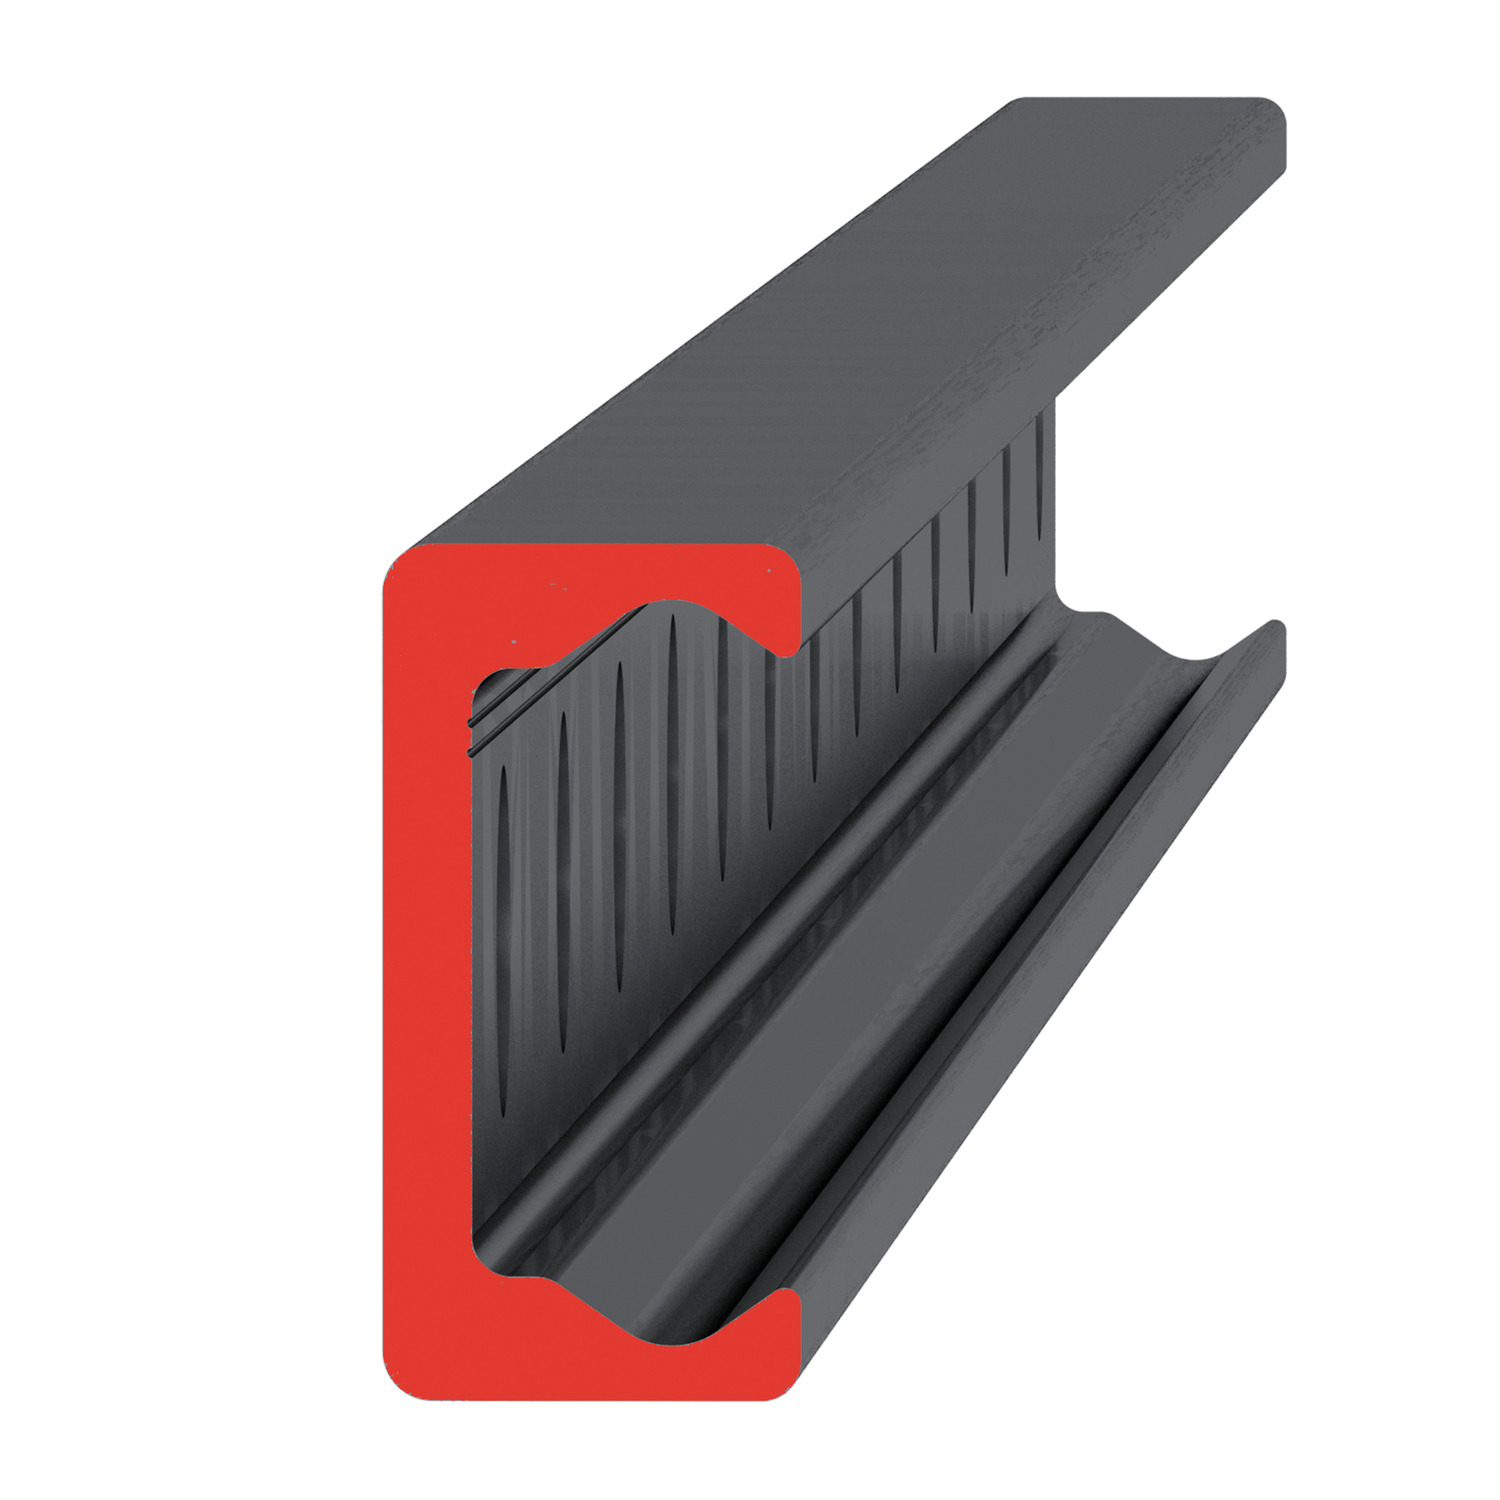 Product L1963.TL, Very Heavy Duty T Rail counterbored holes / 